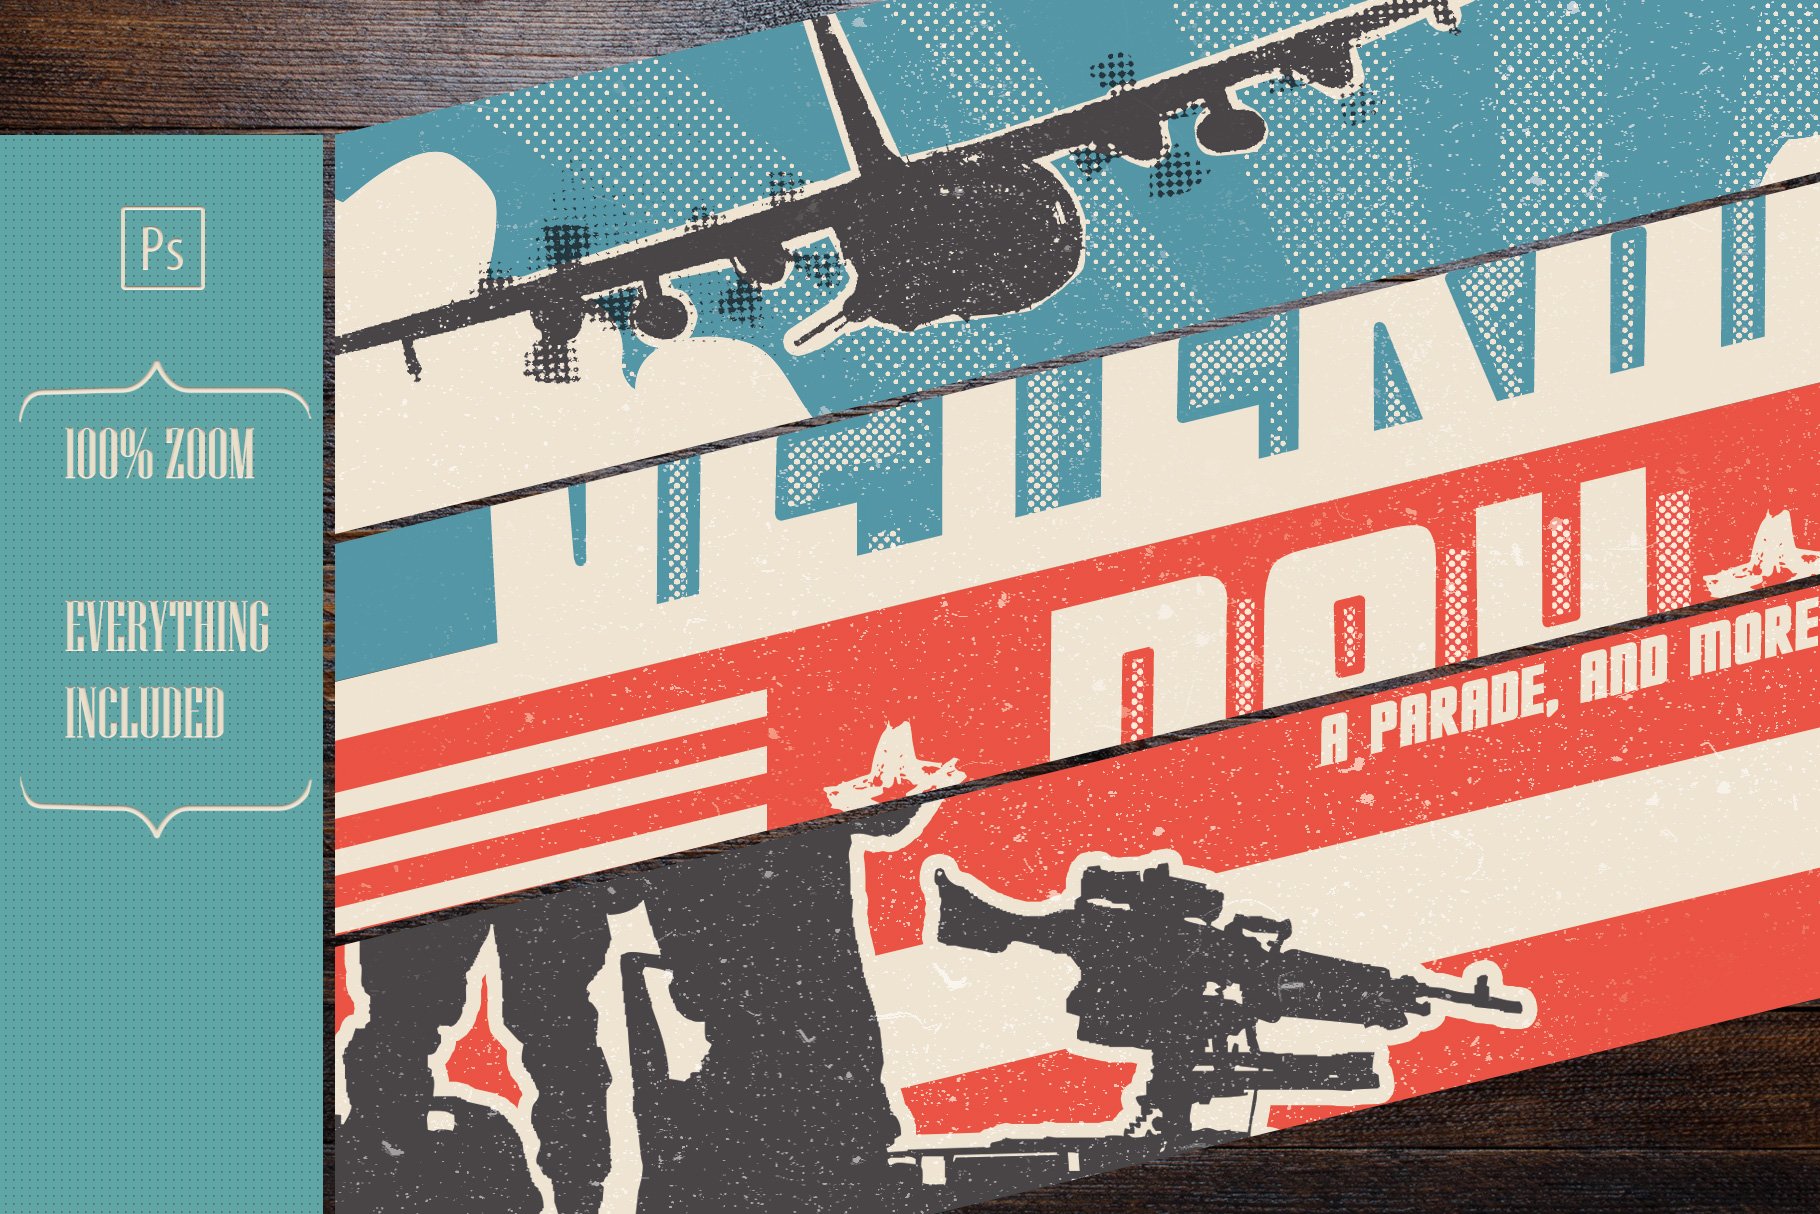 Cool Veterans Day flyer in a retro style.